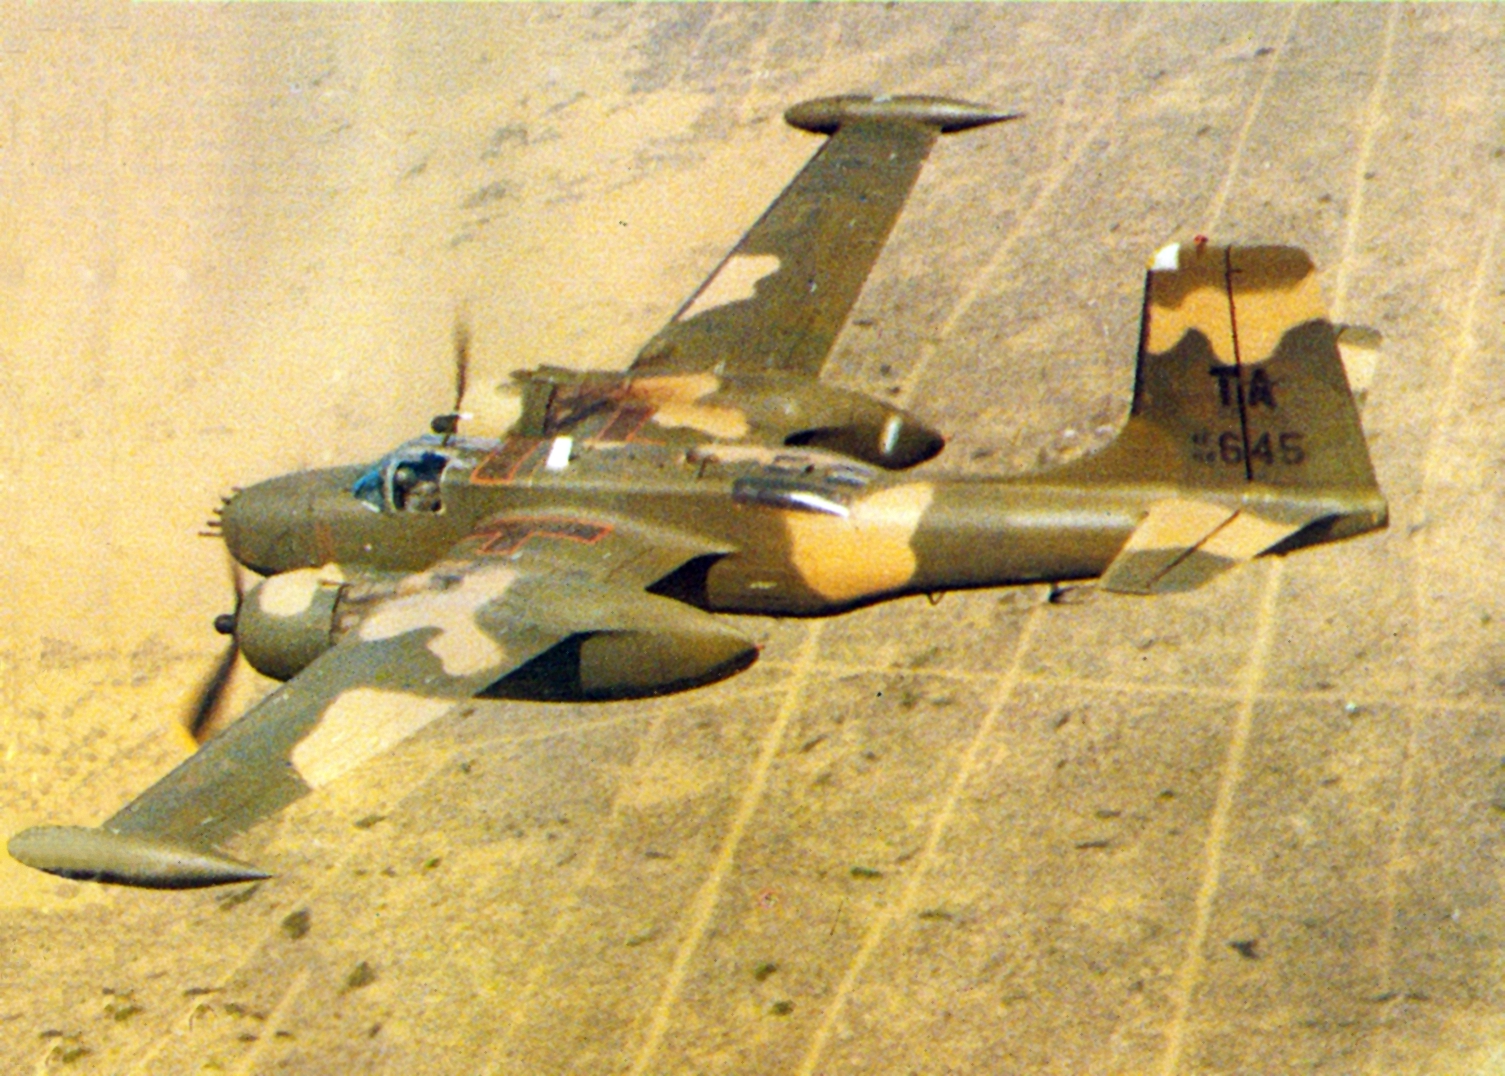 An A-26 Invader of the 609th Special Operations Squadron flying near Nakhon Phanom Royal Thai Air Base in 1969. ( Image via Wikipedia)